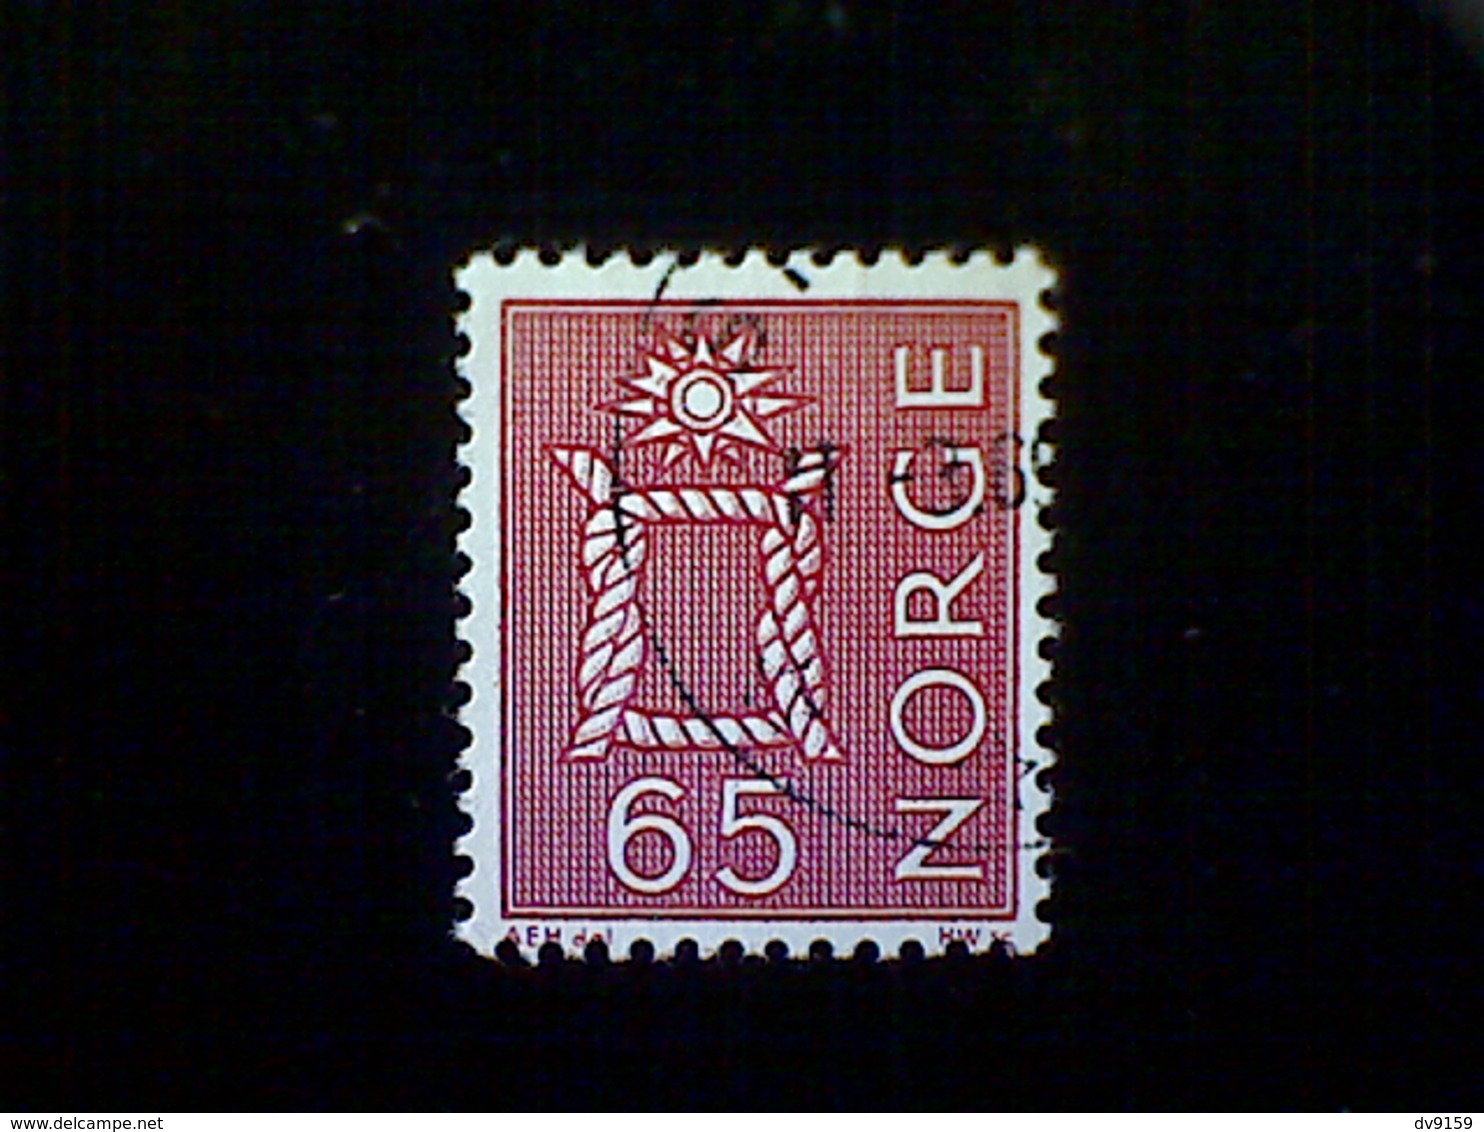 Norway (Norge), Scott #467, Used (o), 1968, Boatswain's Knot, 65ø, Lake - Used Stamps